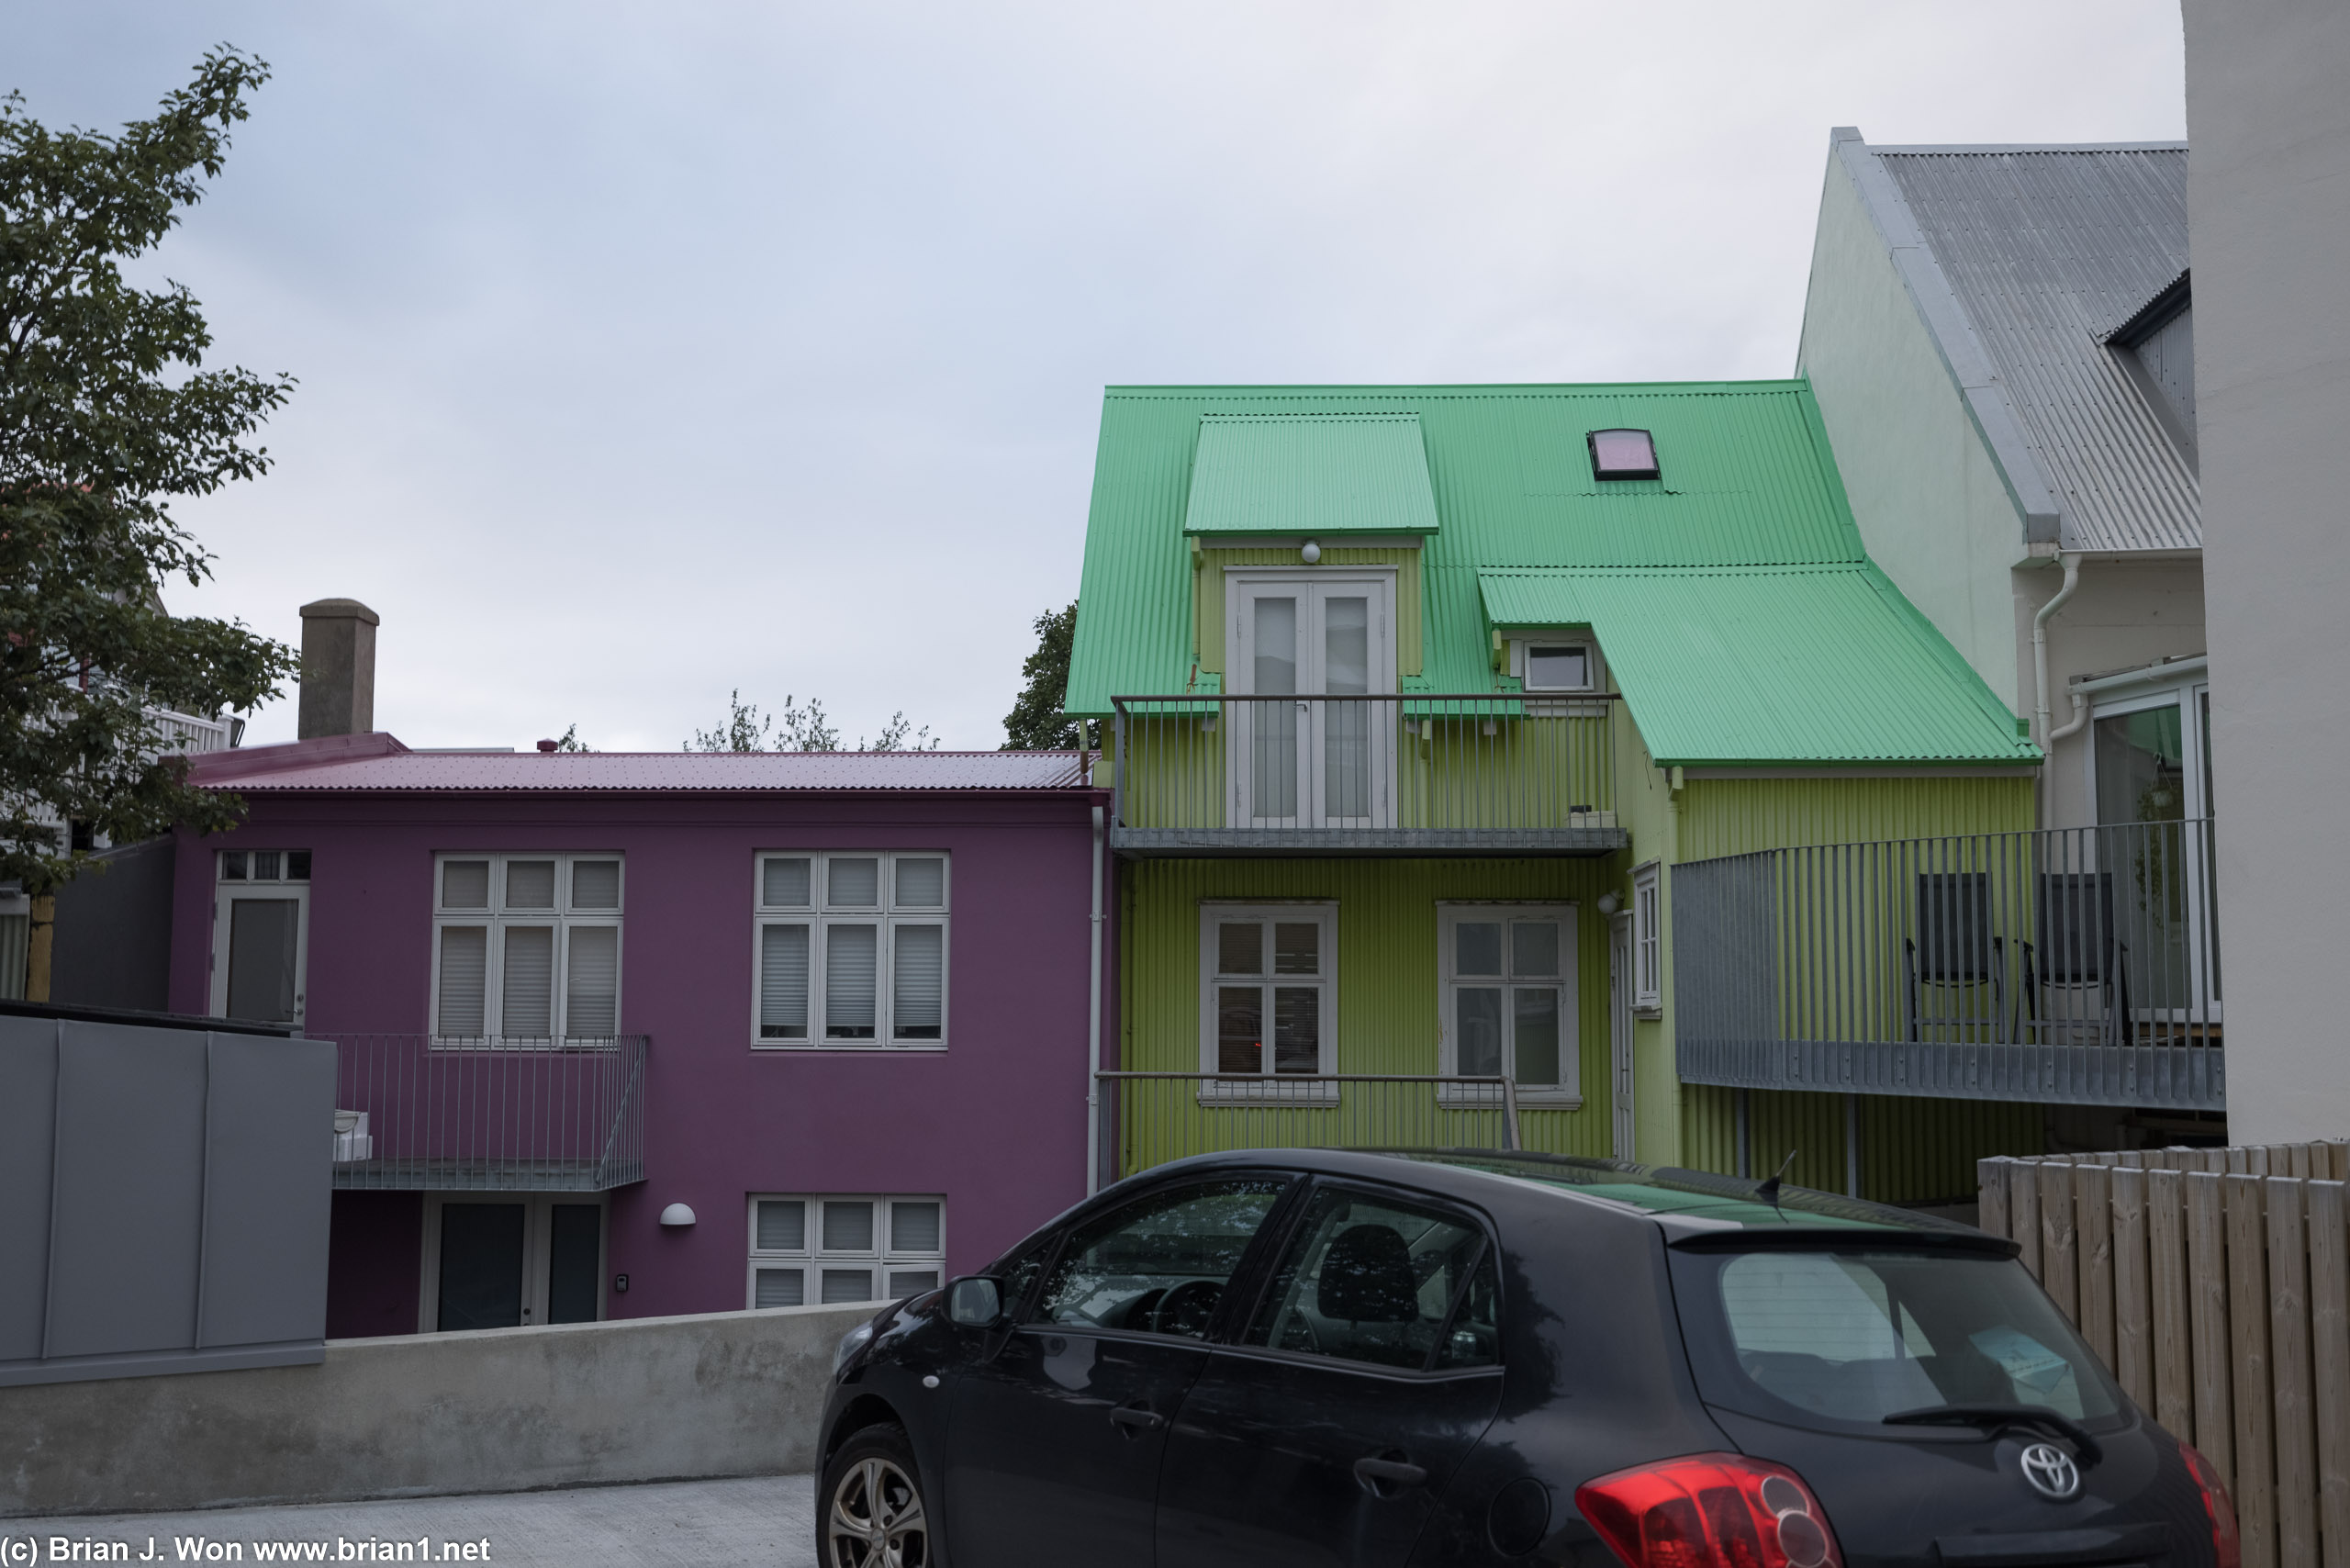 Colorful houses in the city center proper.